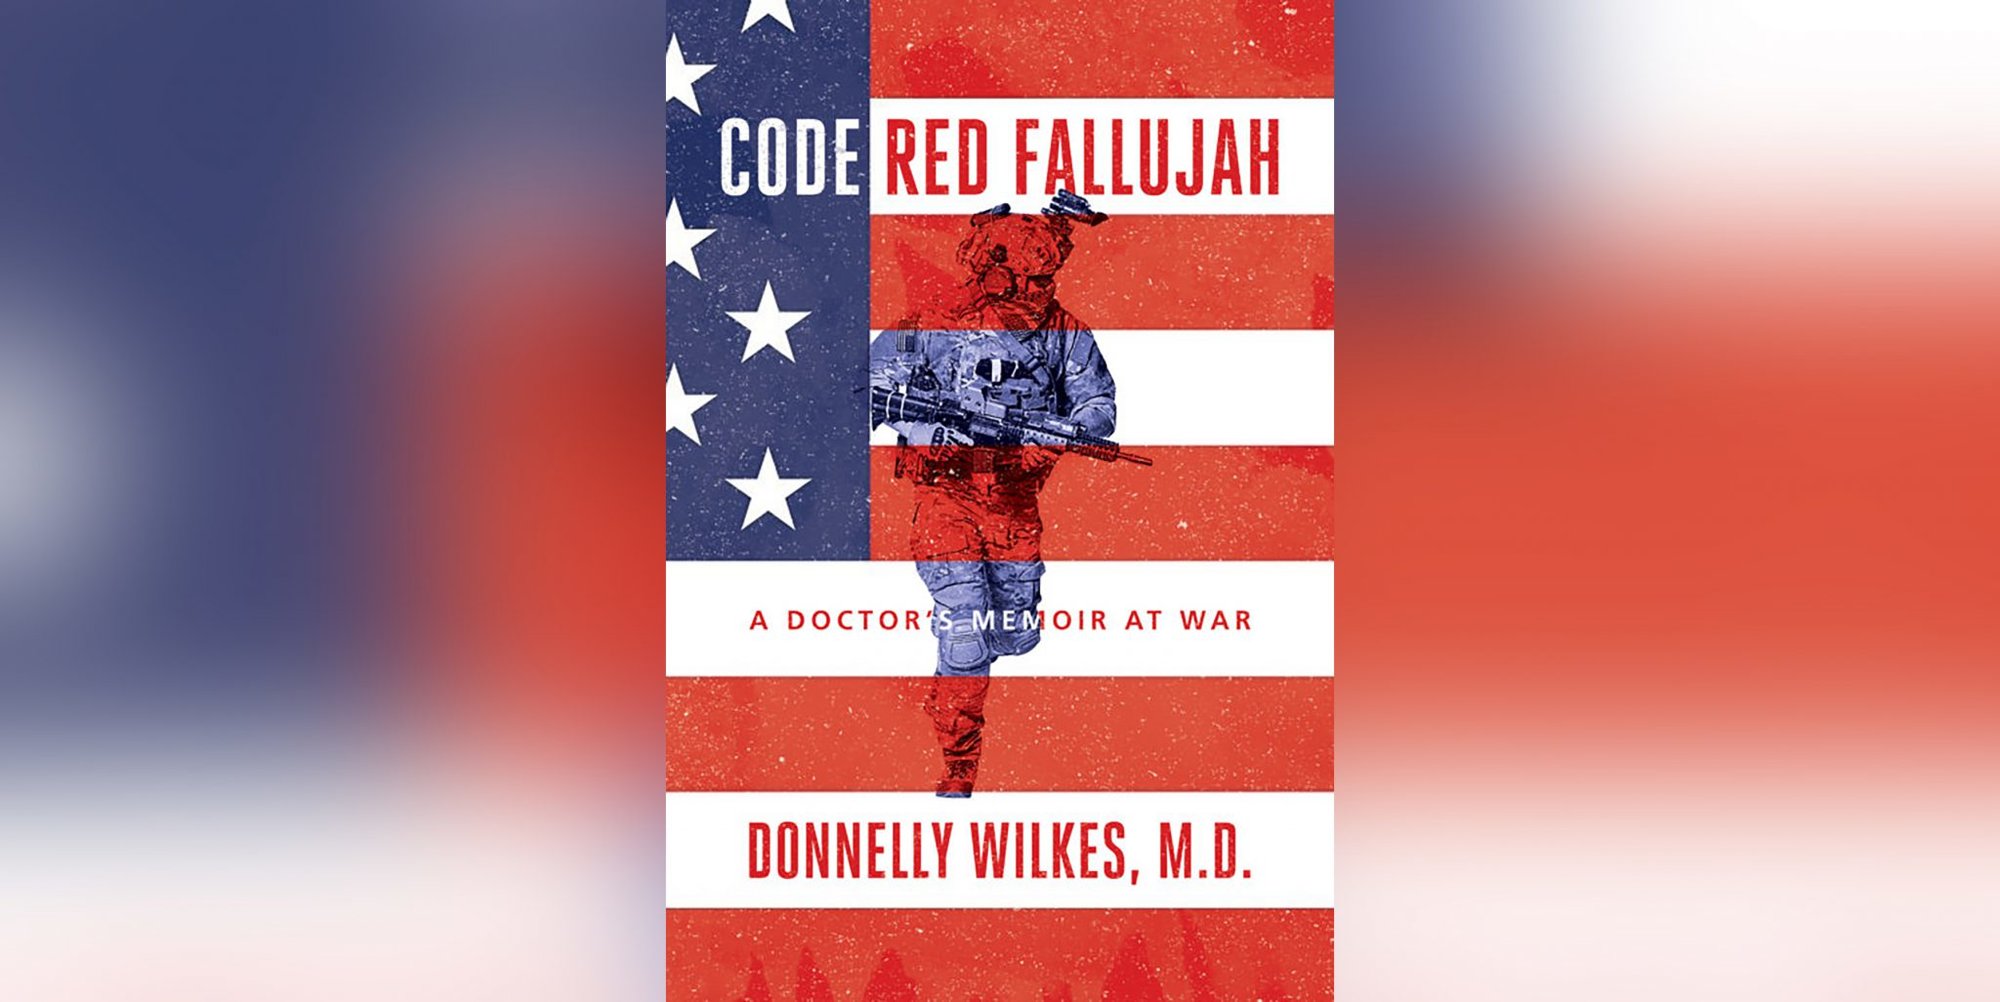 Code Red Fallujah by Donnelly Wilkes